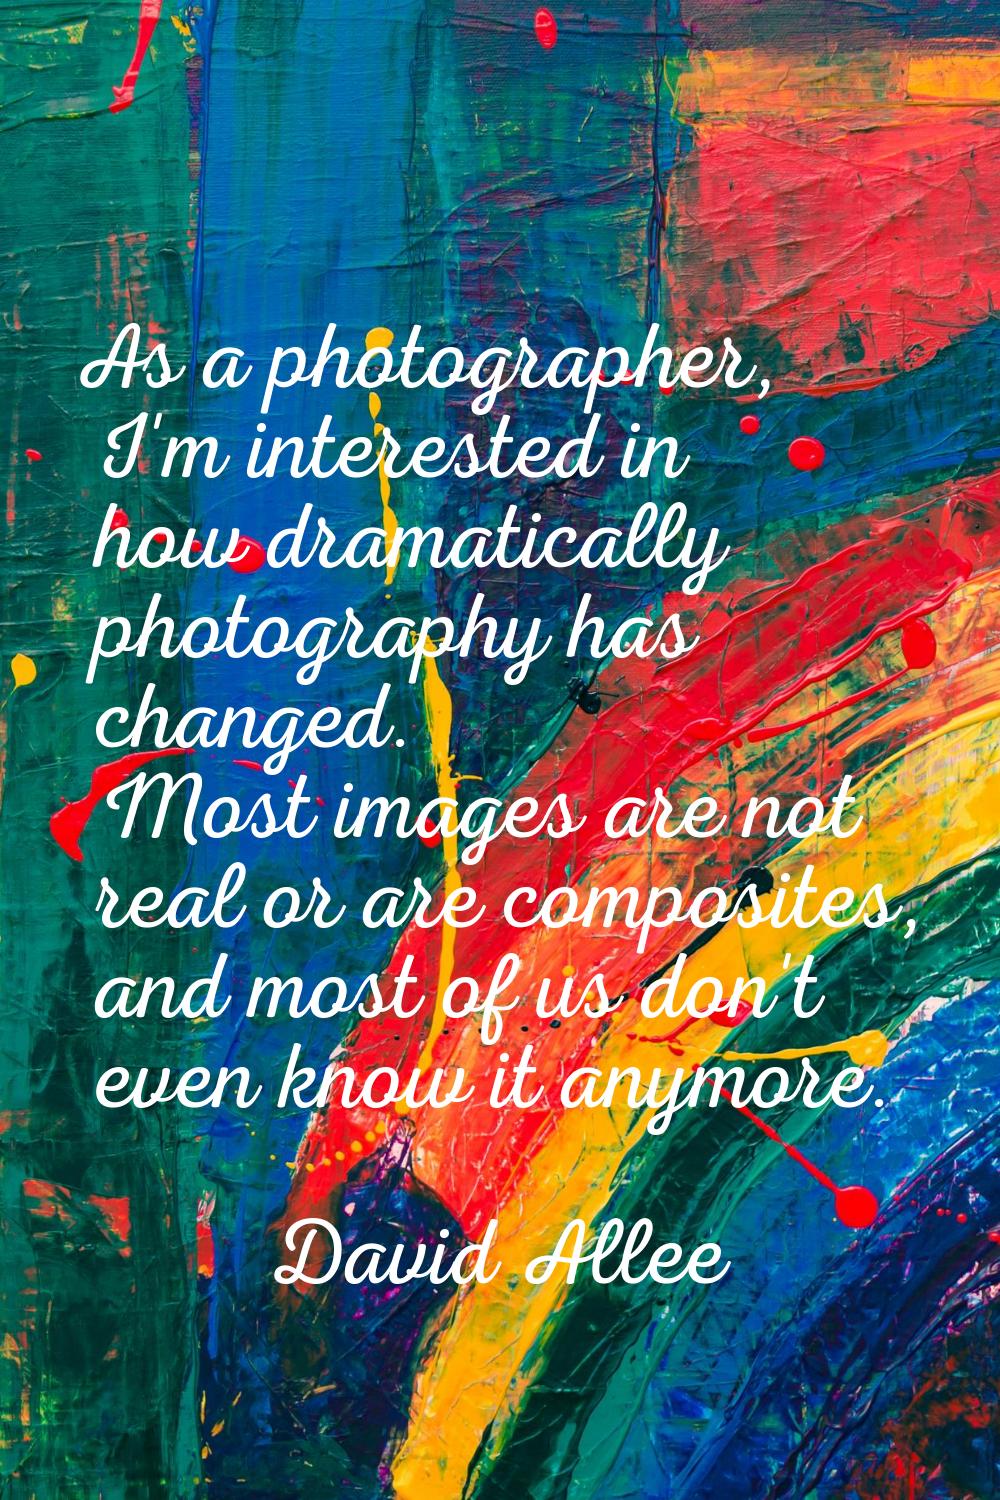 As a photographer, I'm interested in how dramatically photography has changed. Most images are not 